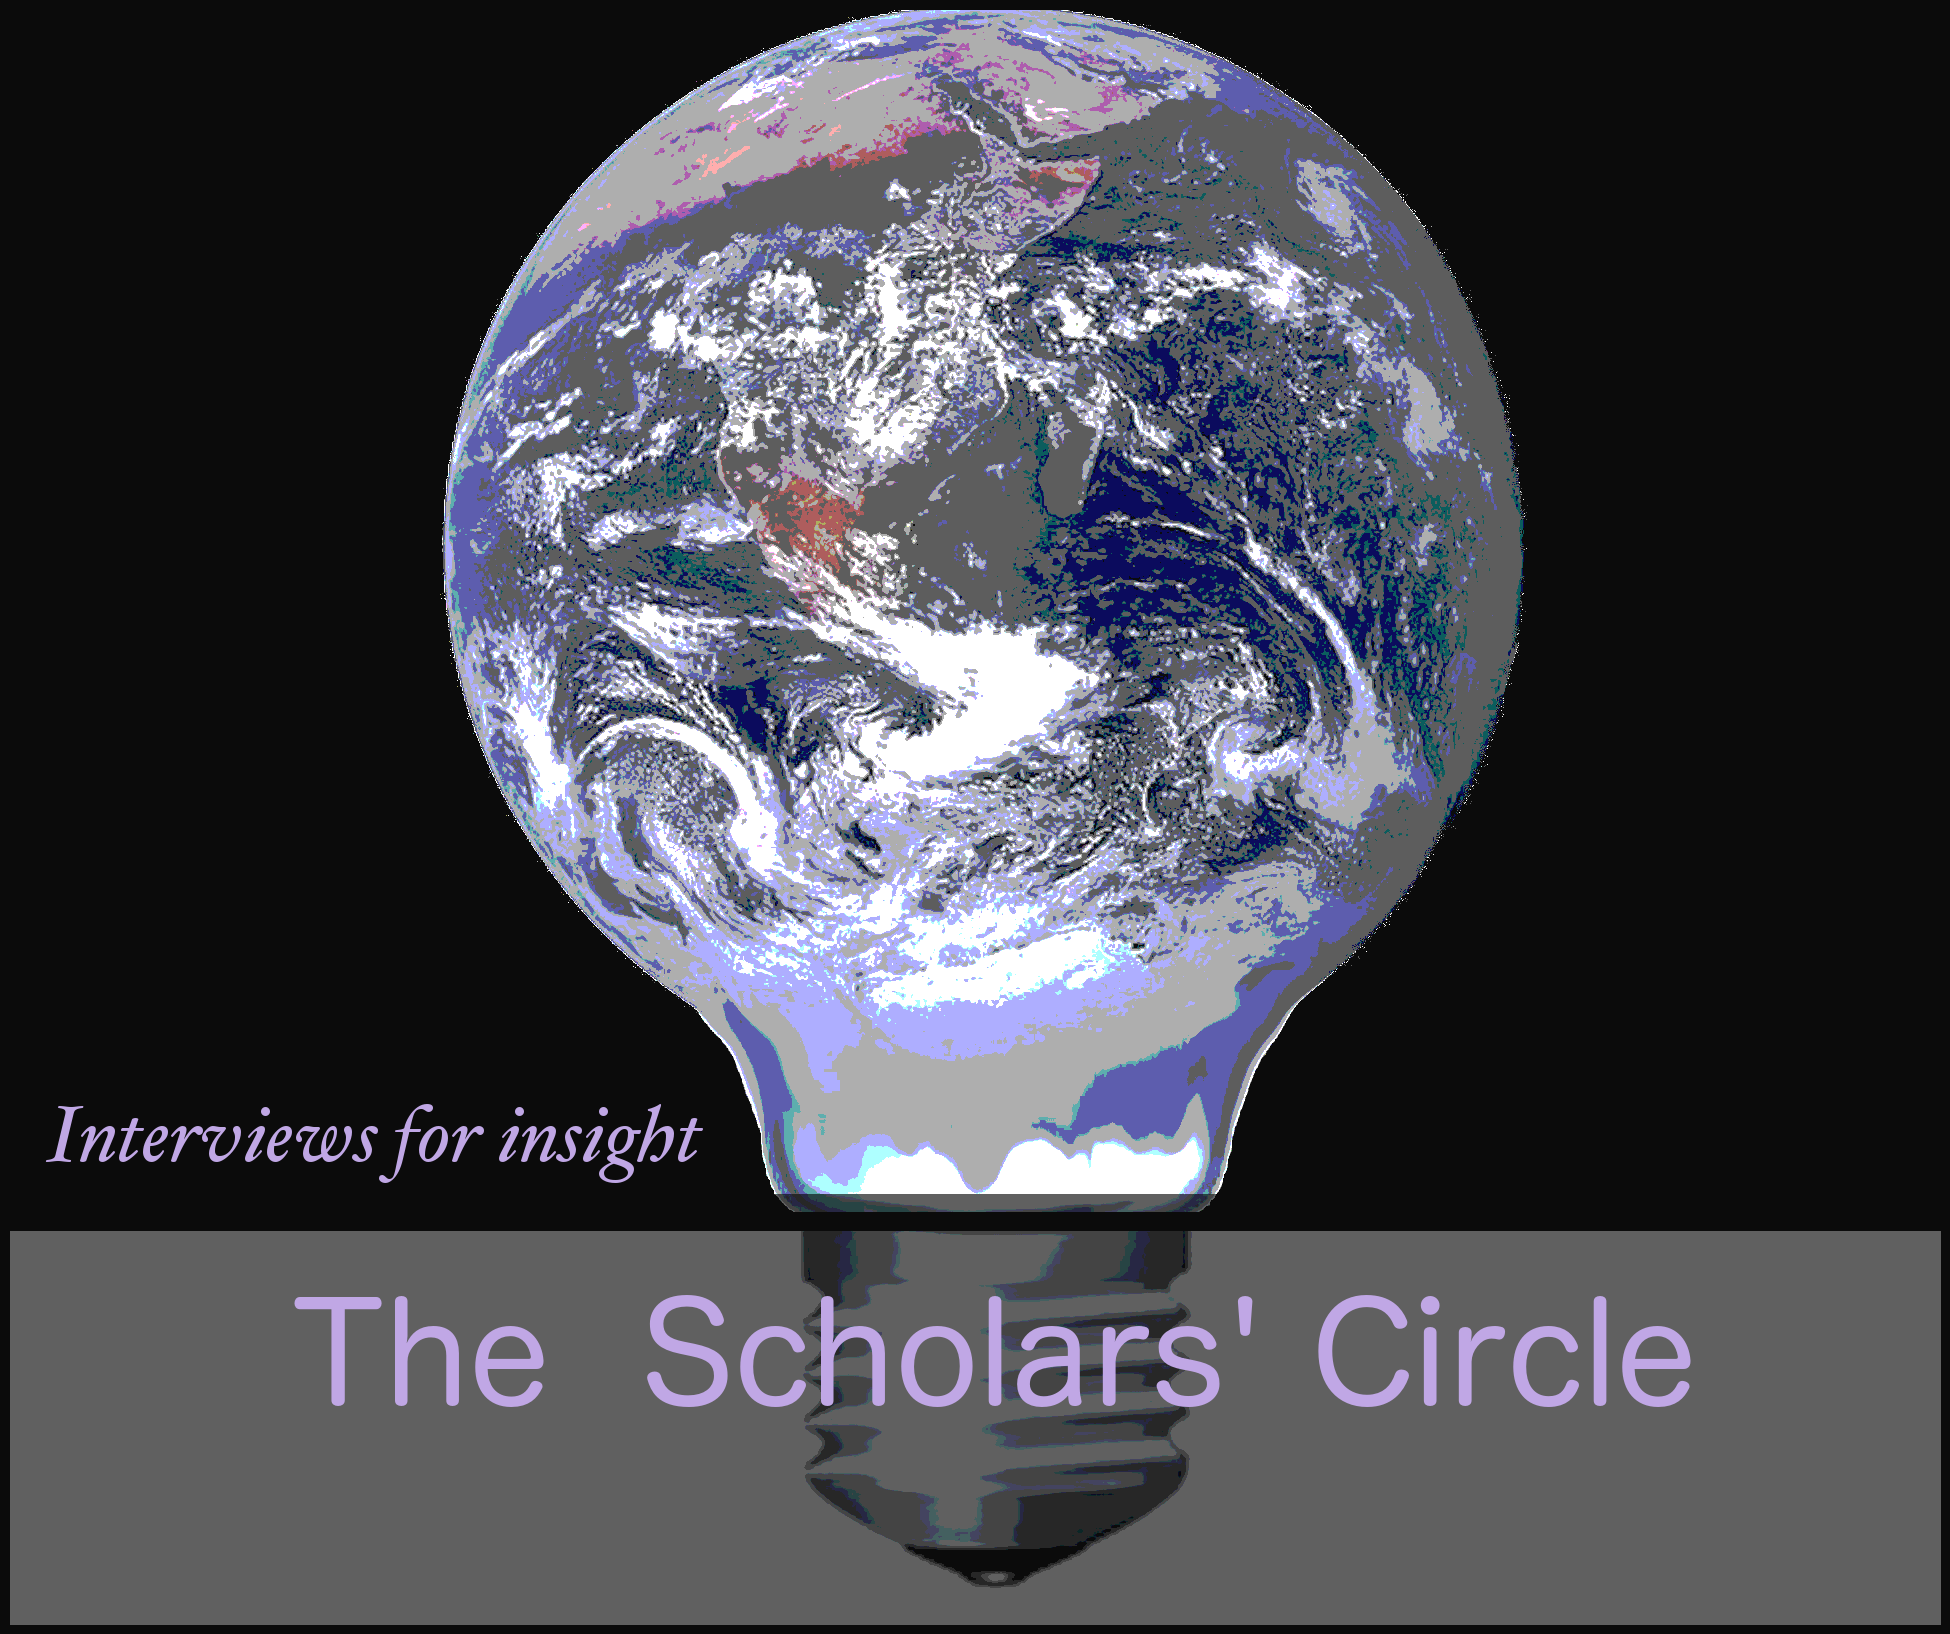 Scholar's Circle and The Insighters